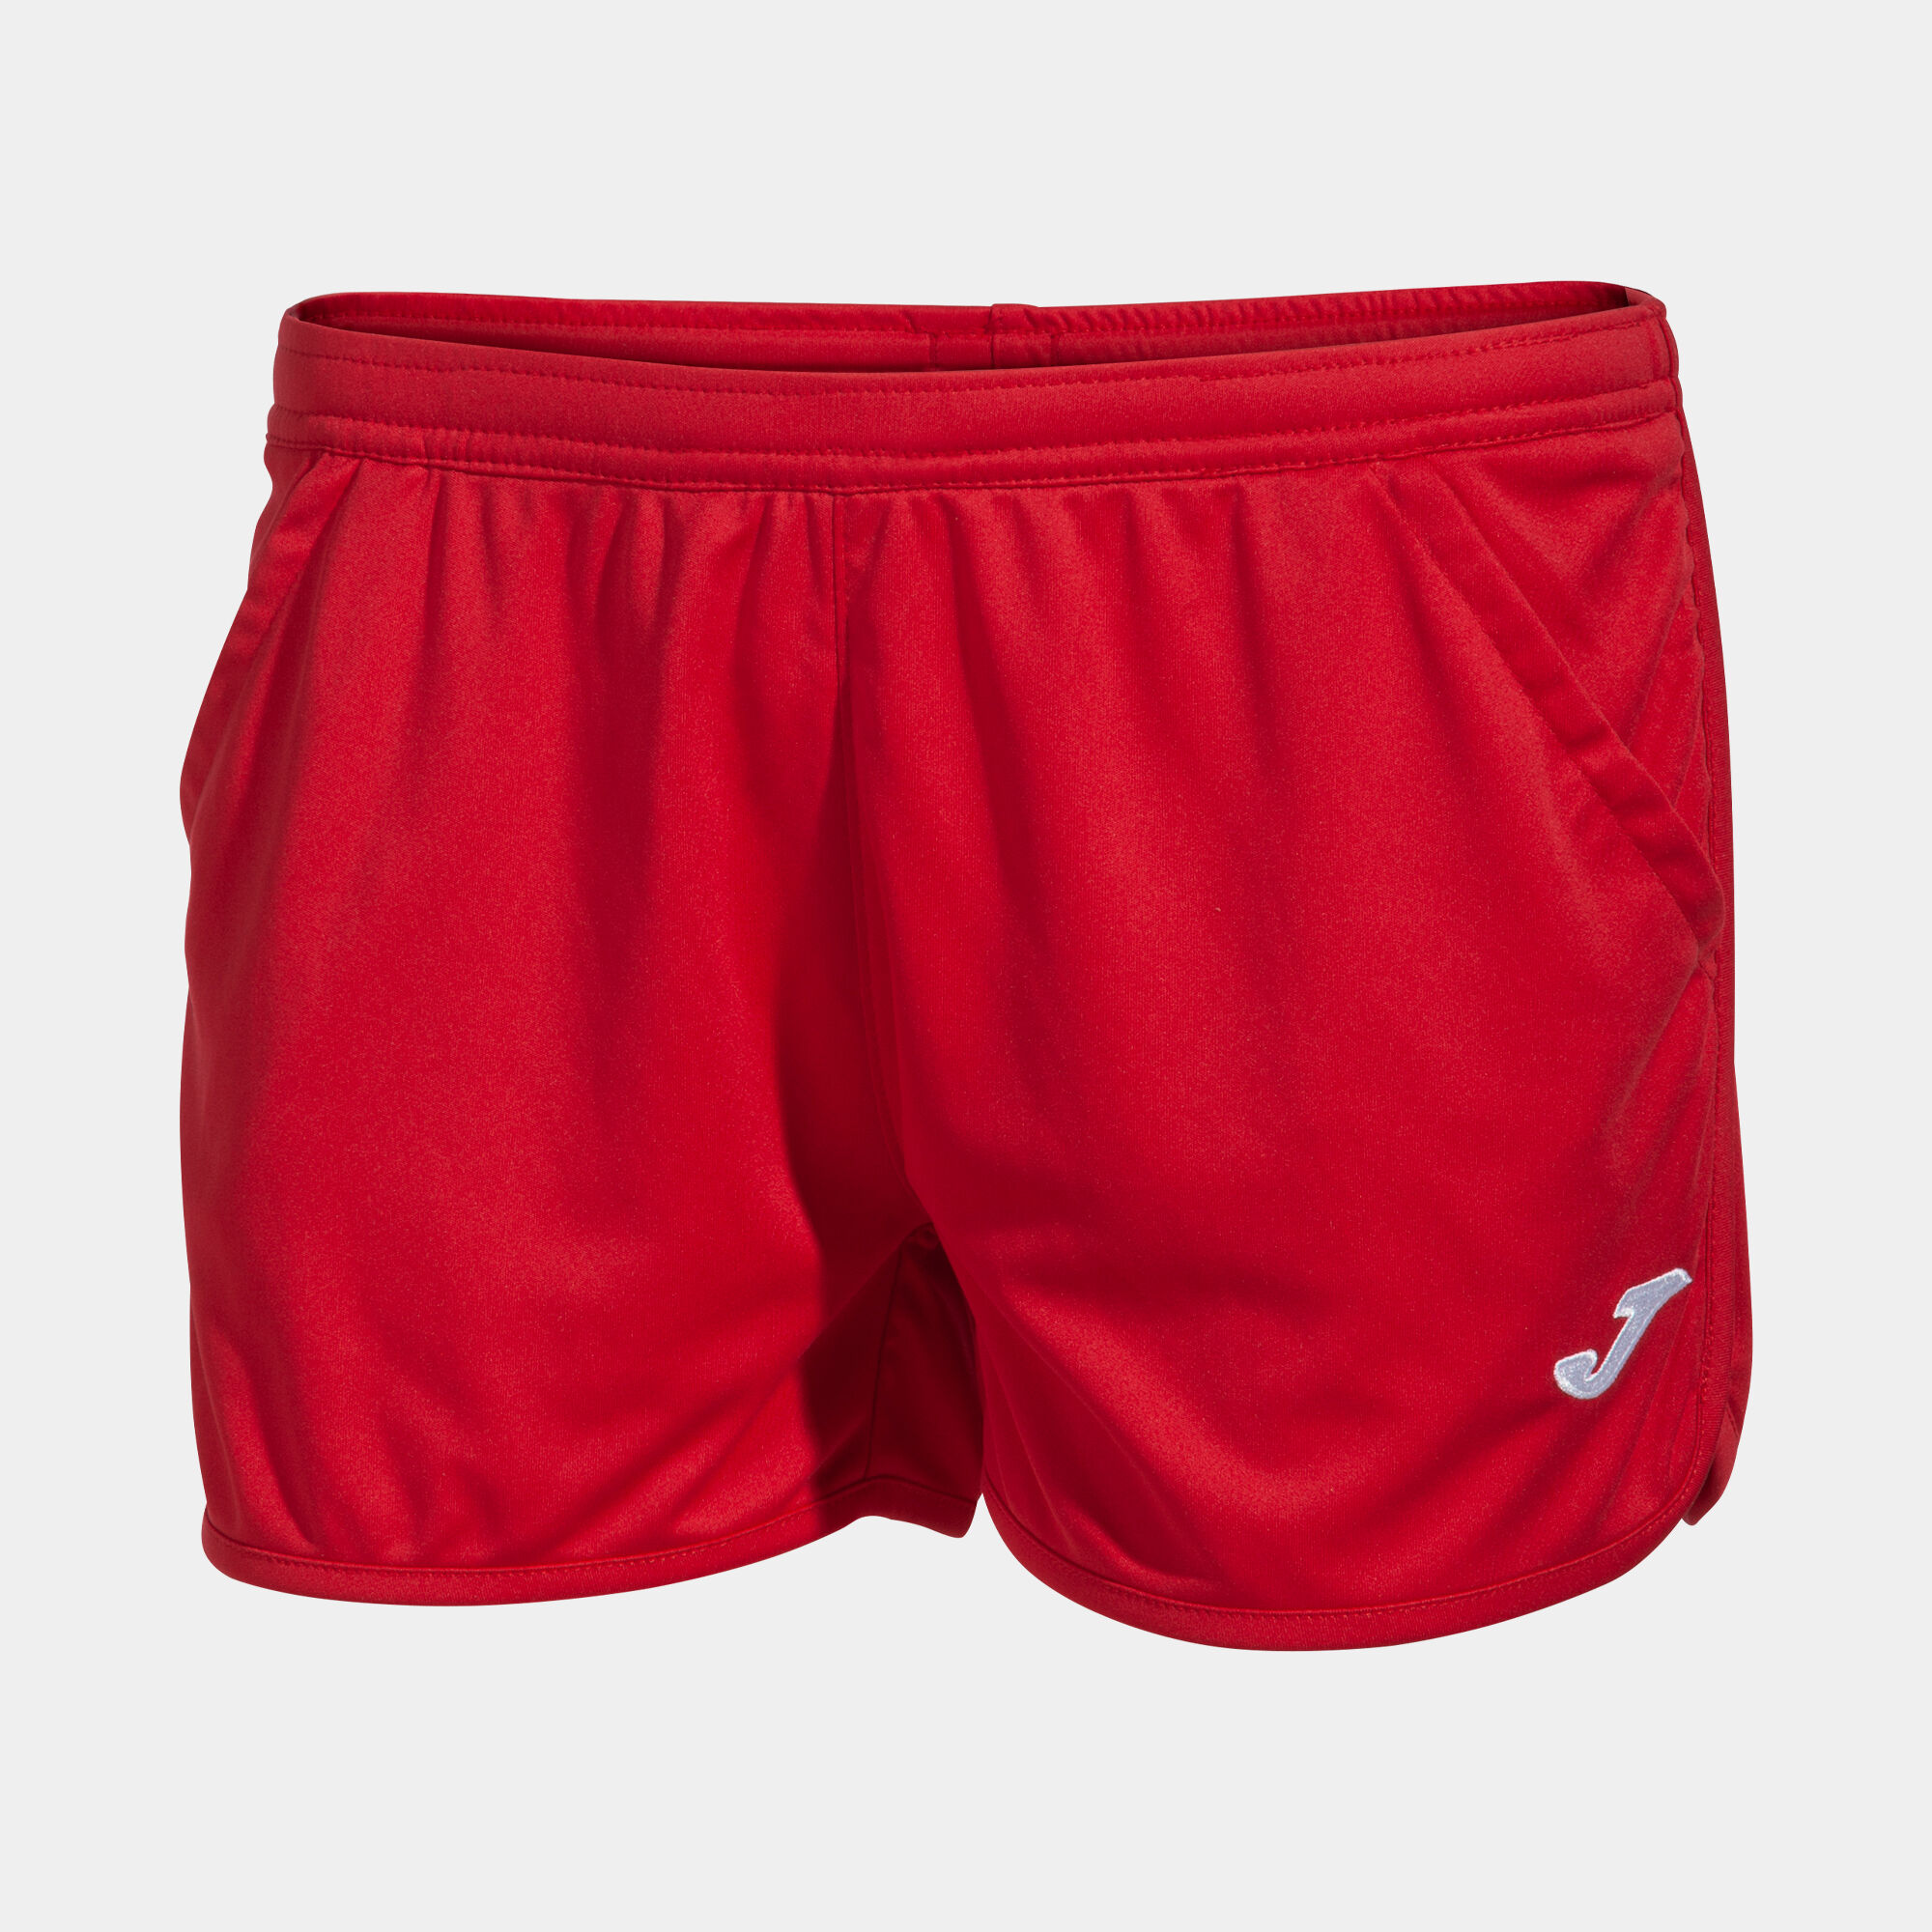 SHORTS WOMAN HOBBY RED